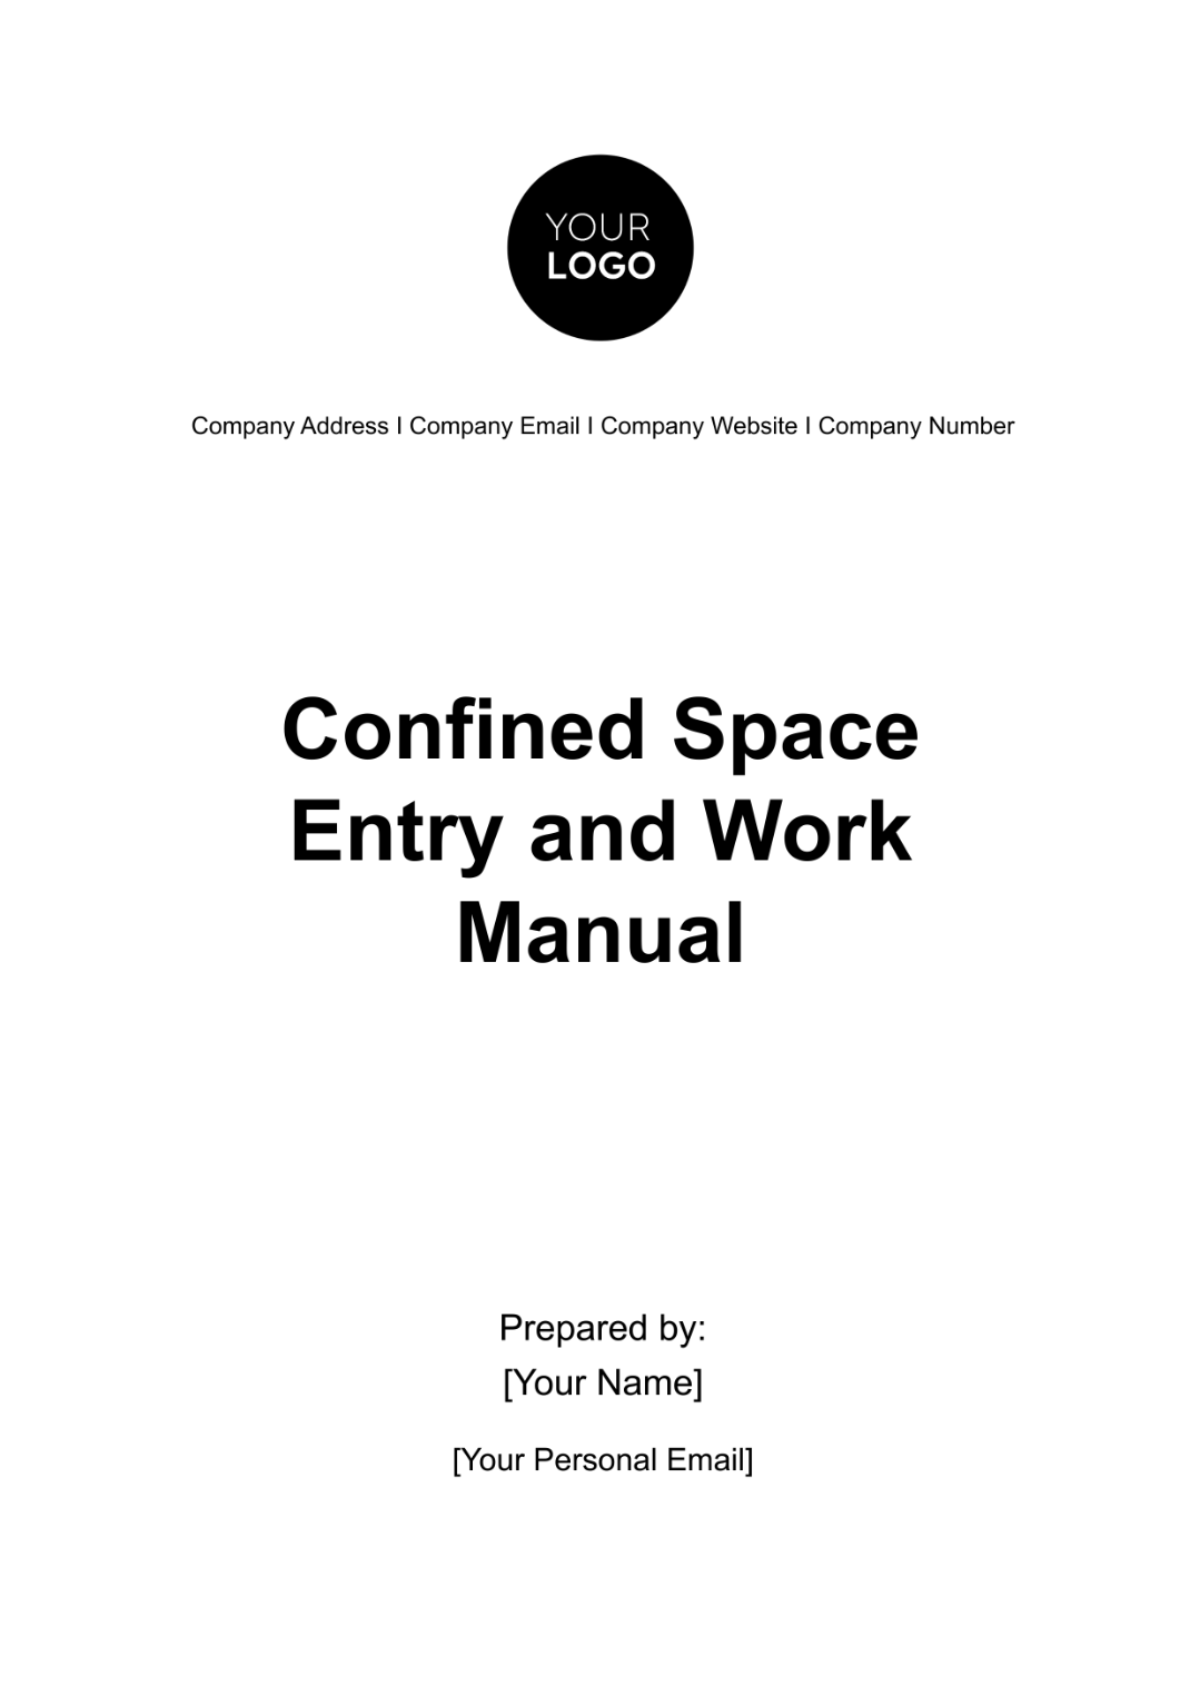 Confined Space Entry and Work Manual HR Template